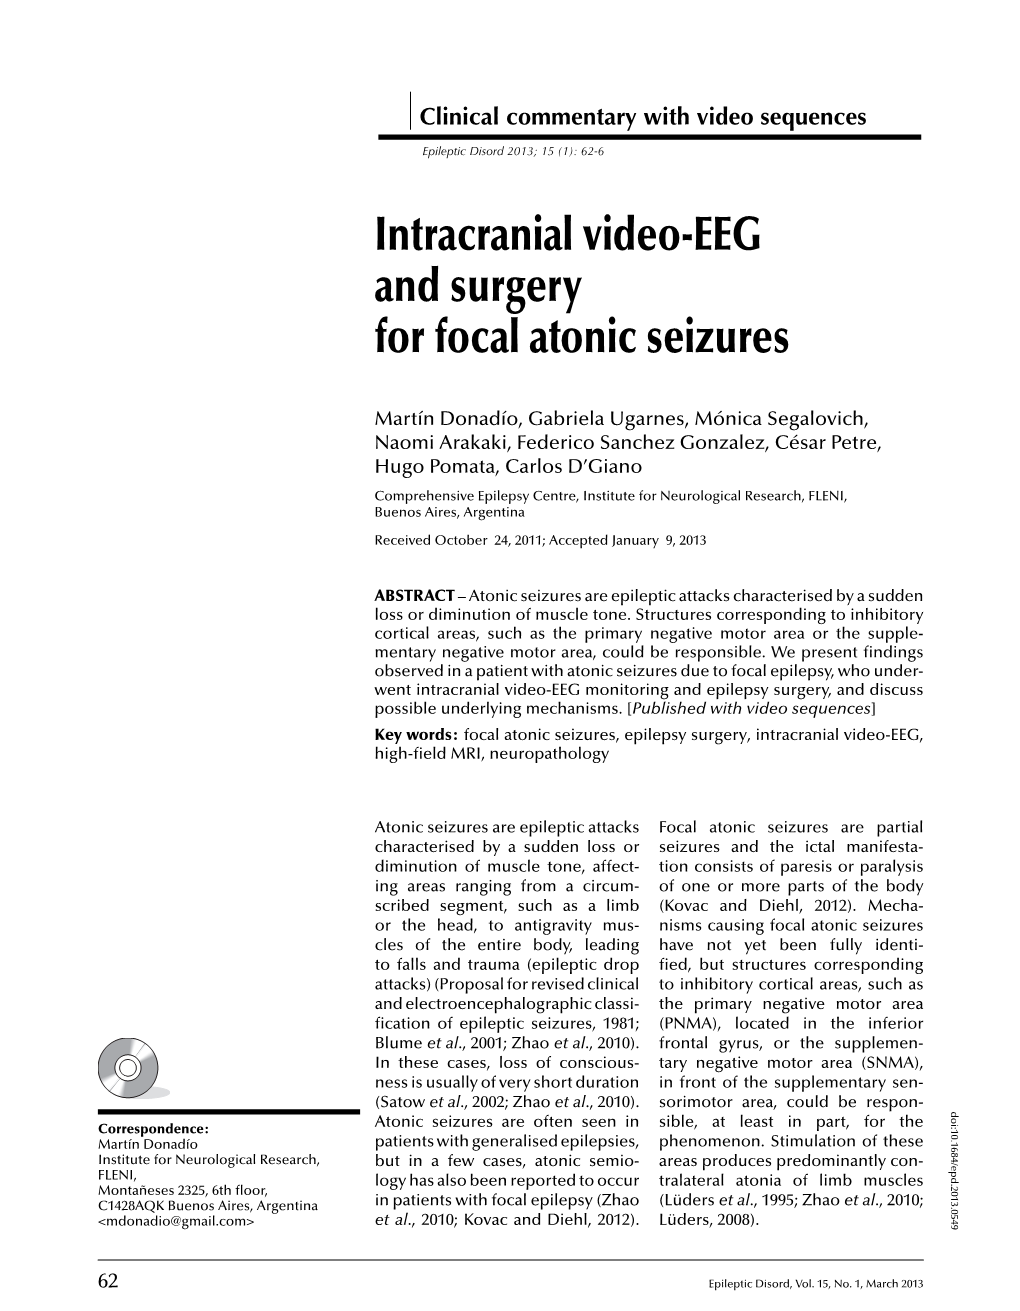 Intracranial Video-EEG and Surgery for Focal Atonic Seizures